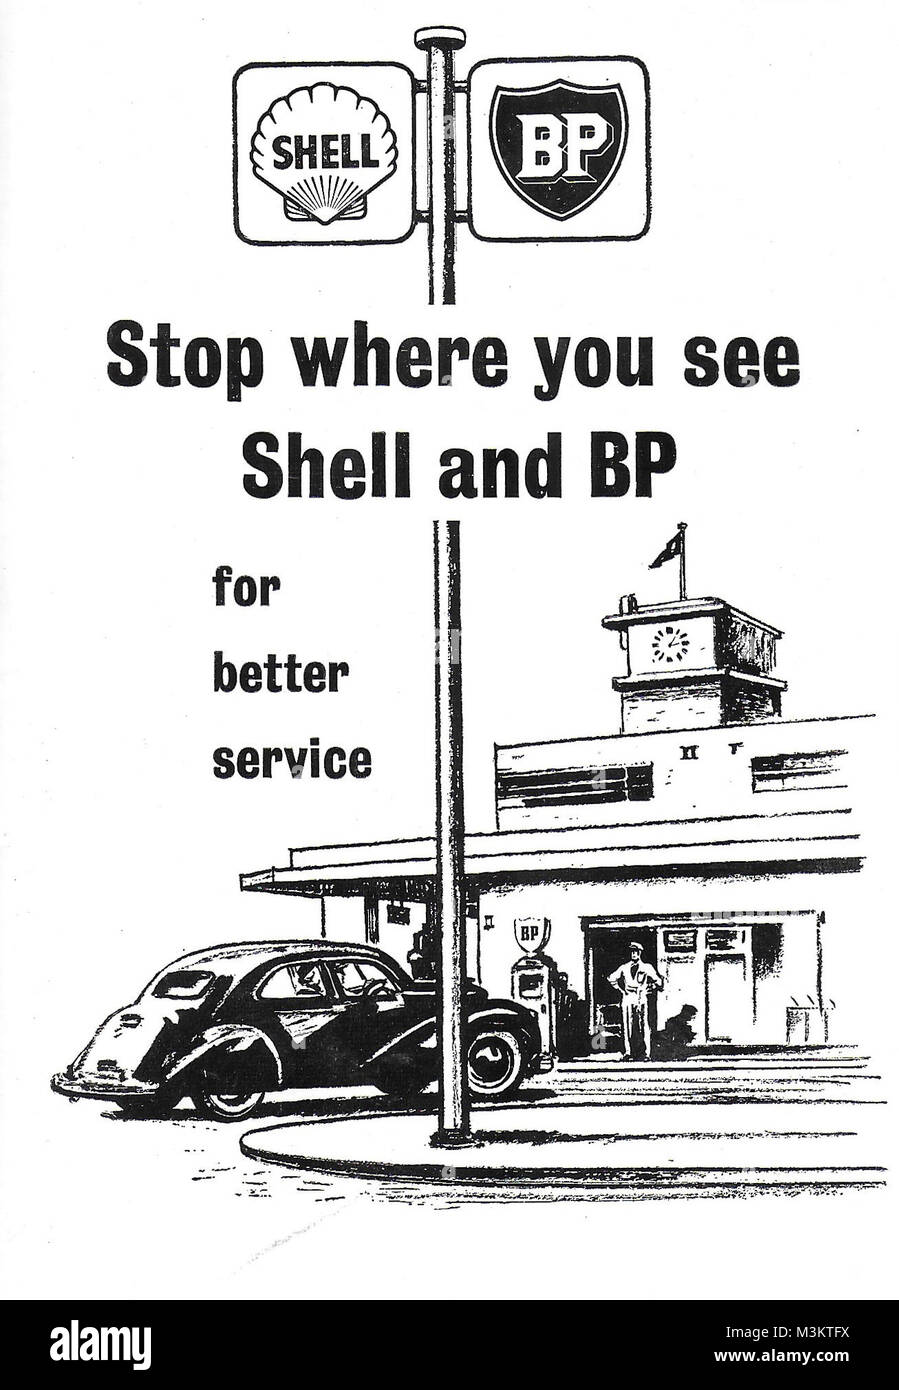 Shell and BP petrol service advert, advertising in Country Life magazine UK 1951 Stock Photo